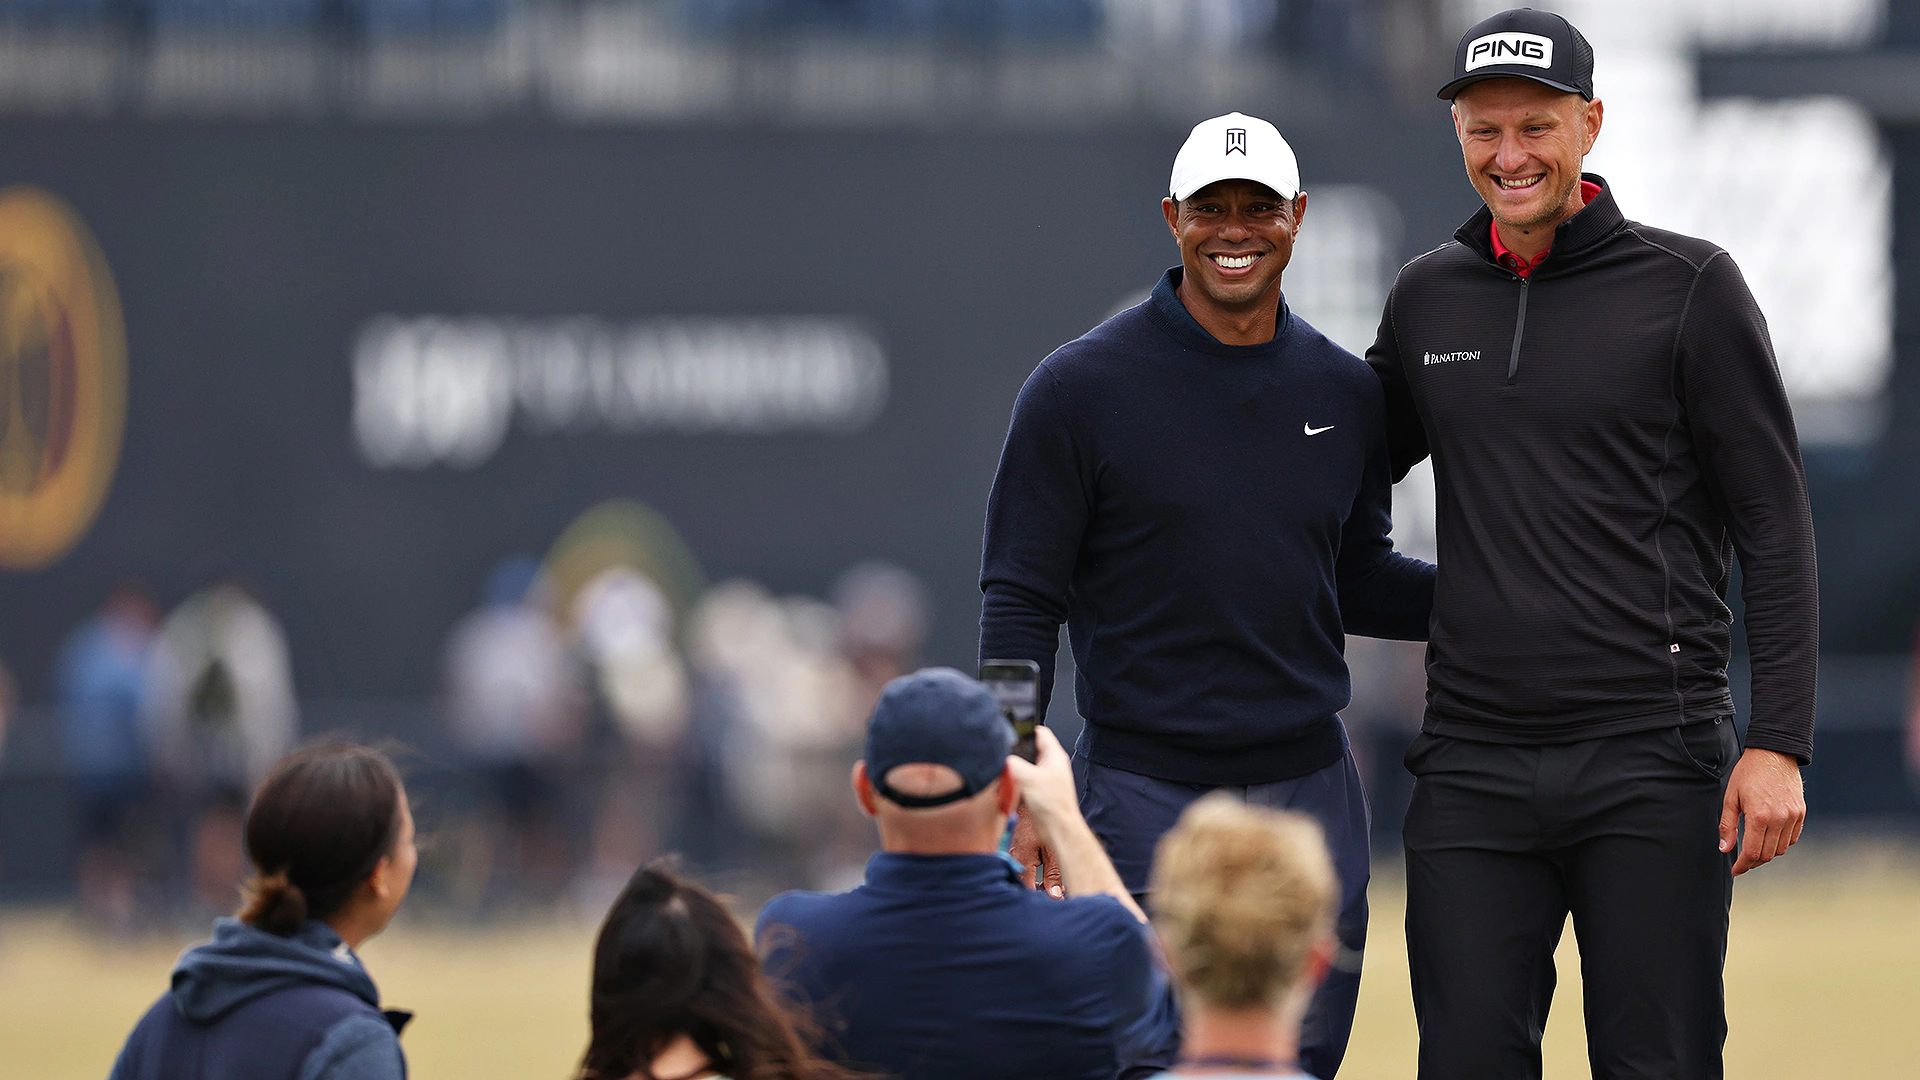 2022 British Open: Adrian Meronk gets thrill of a lifetime in playing nine holes with Tiger Woods on Tuesday